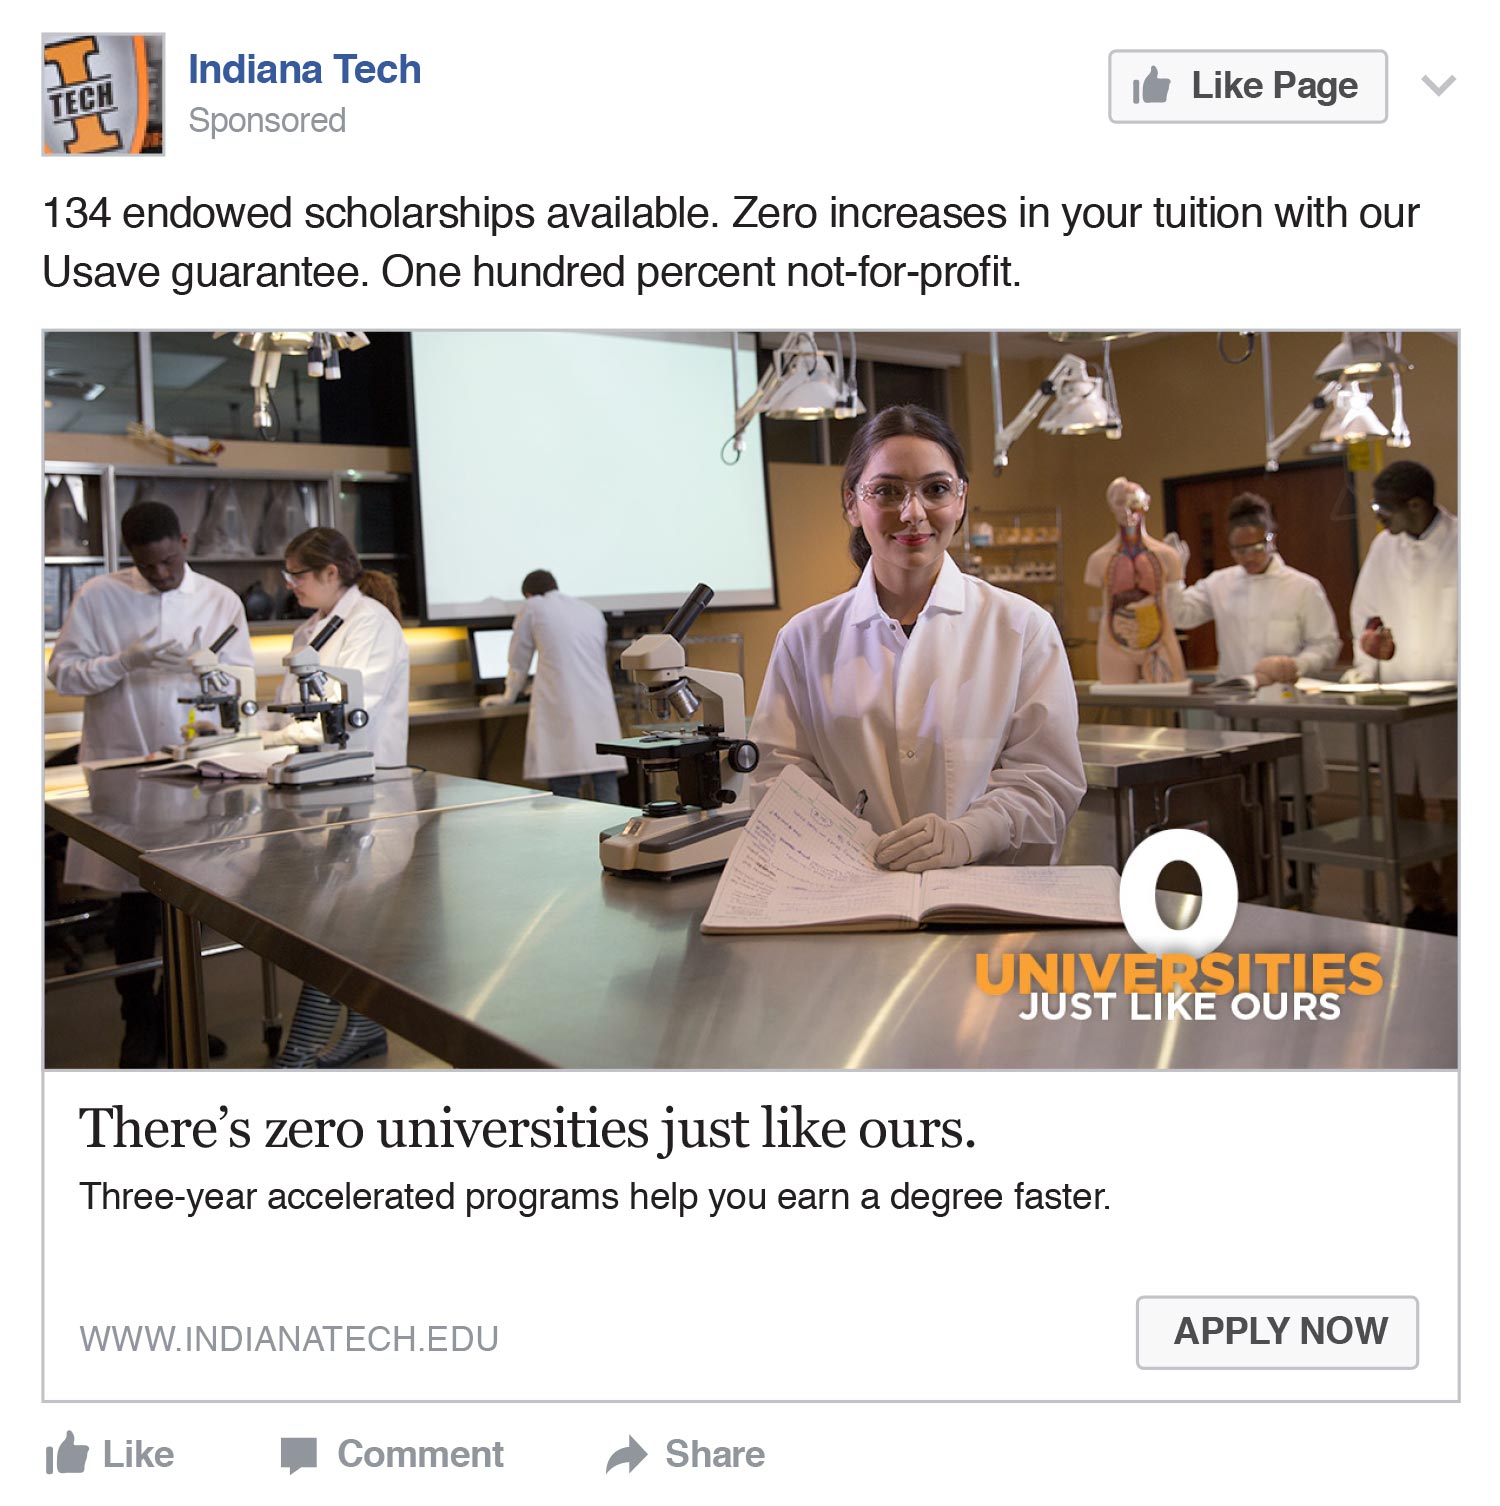 Indiana Tech: Zero Universities Like Ours Facebook ad